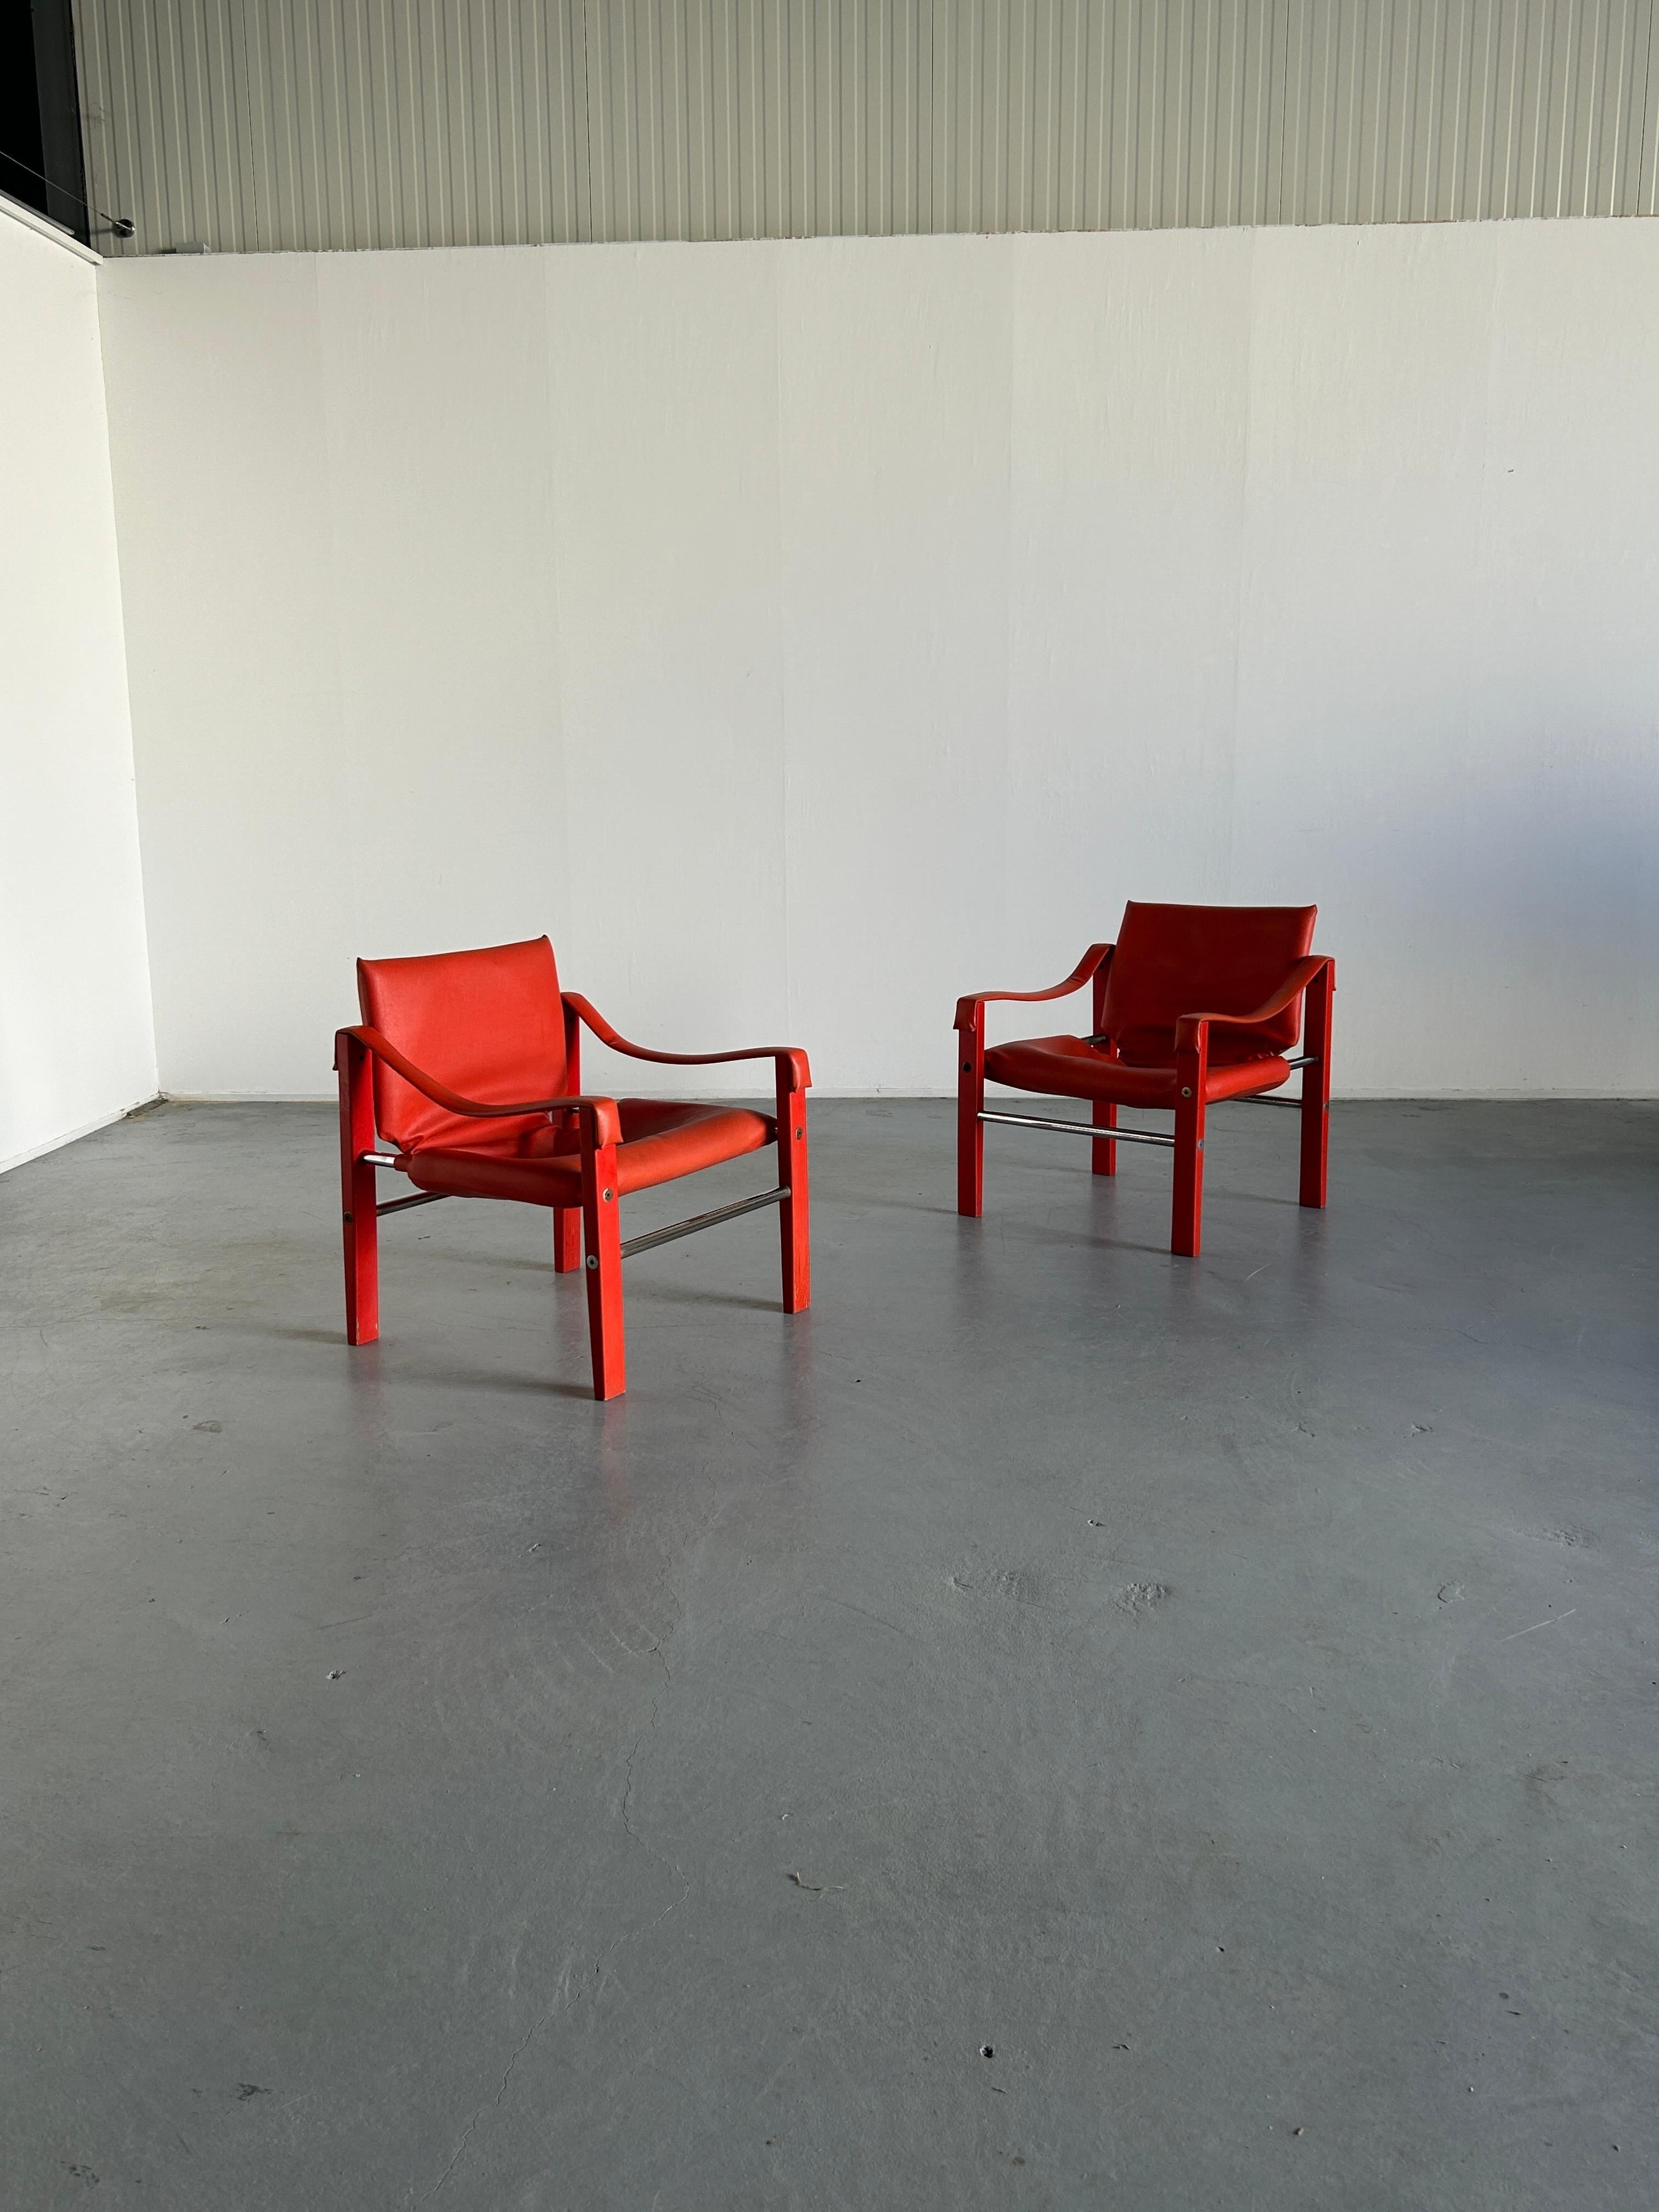 Rare edition vintage Safari chairs designed by Maurice Burke for Arkana Furniture, wearing their original red faux leather or vinyl with a coloured teak frame, tubular chrome metal runners, and steel screw details. 1960s production, both original